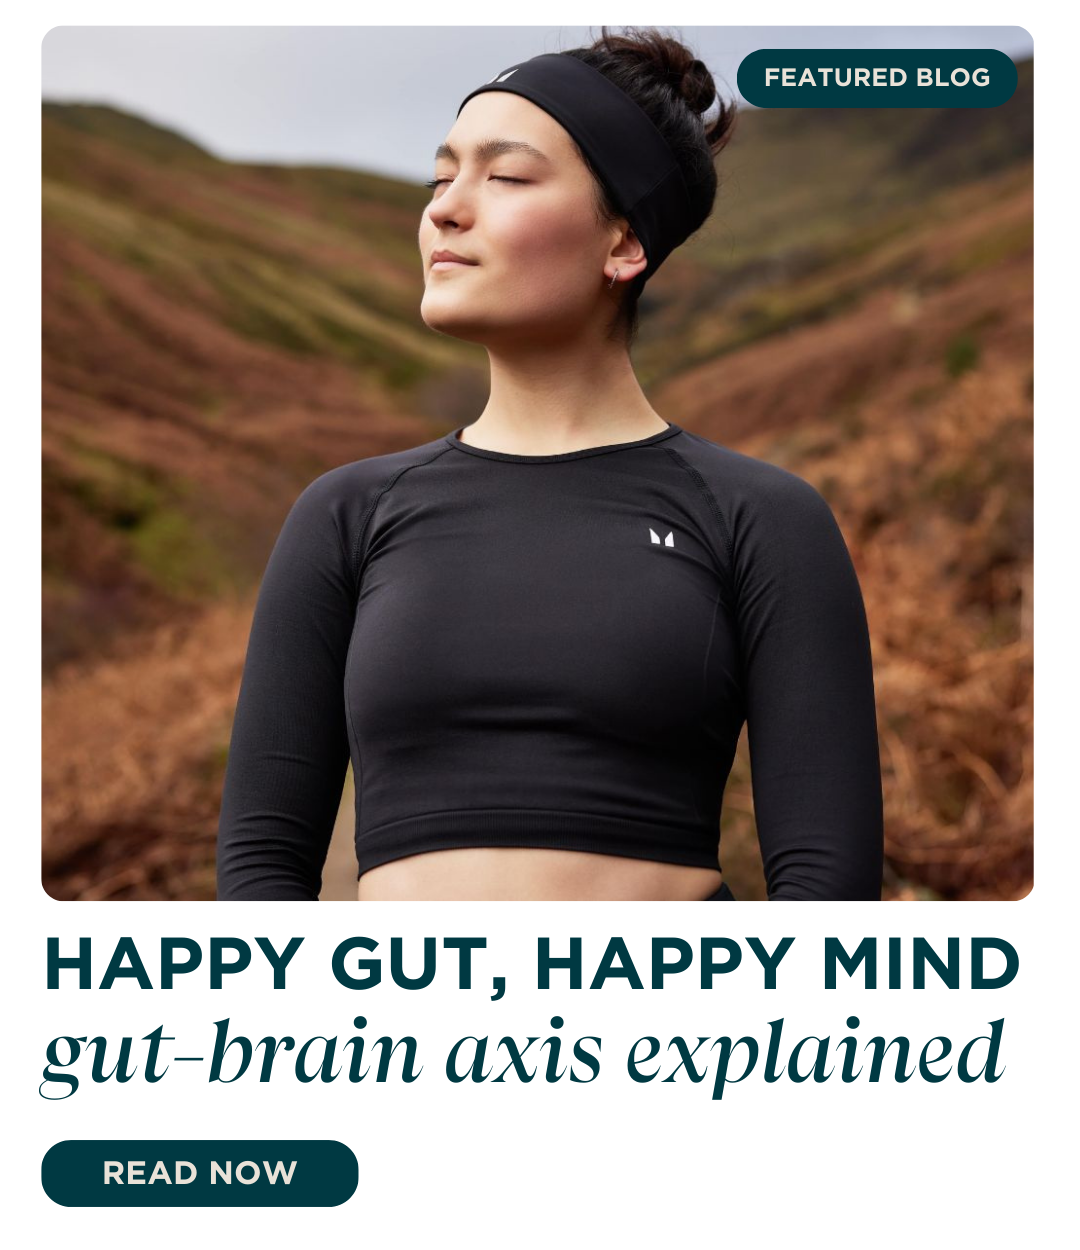 Happy Gut, Happy Mind: Gut-Brain Axis Explained - read more